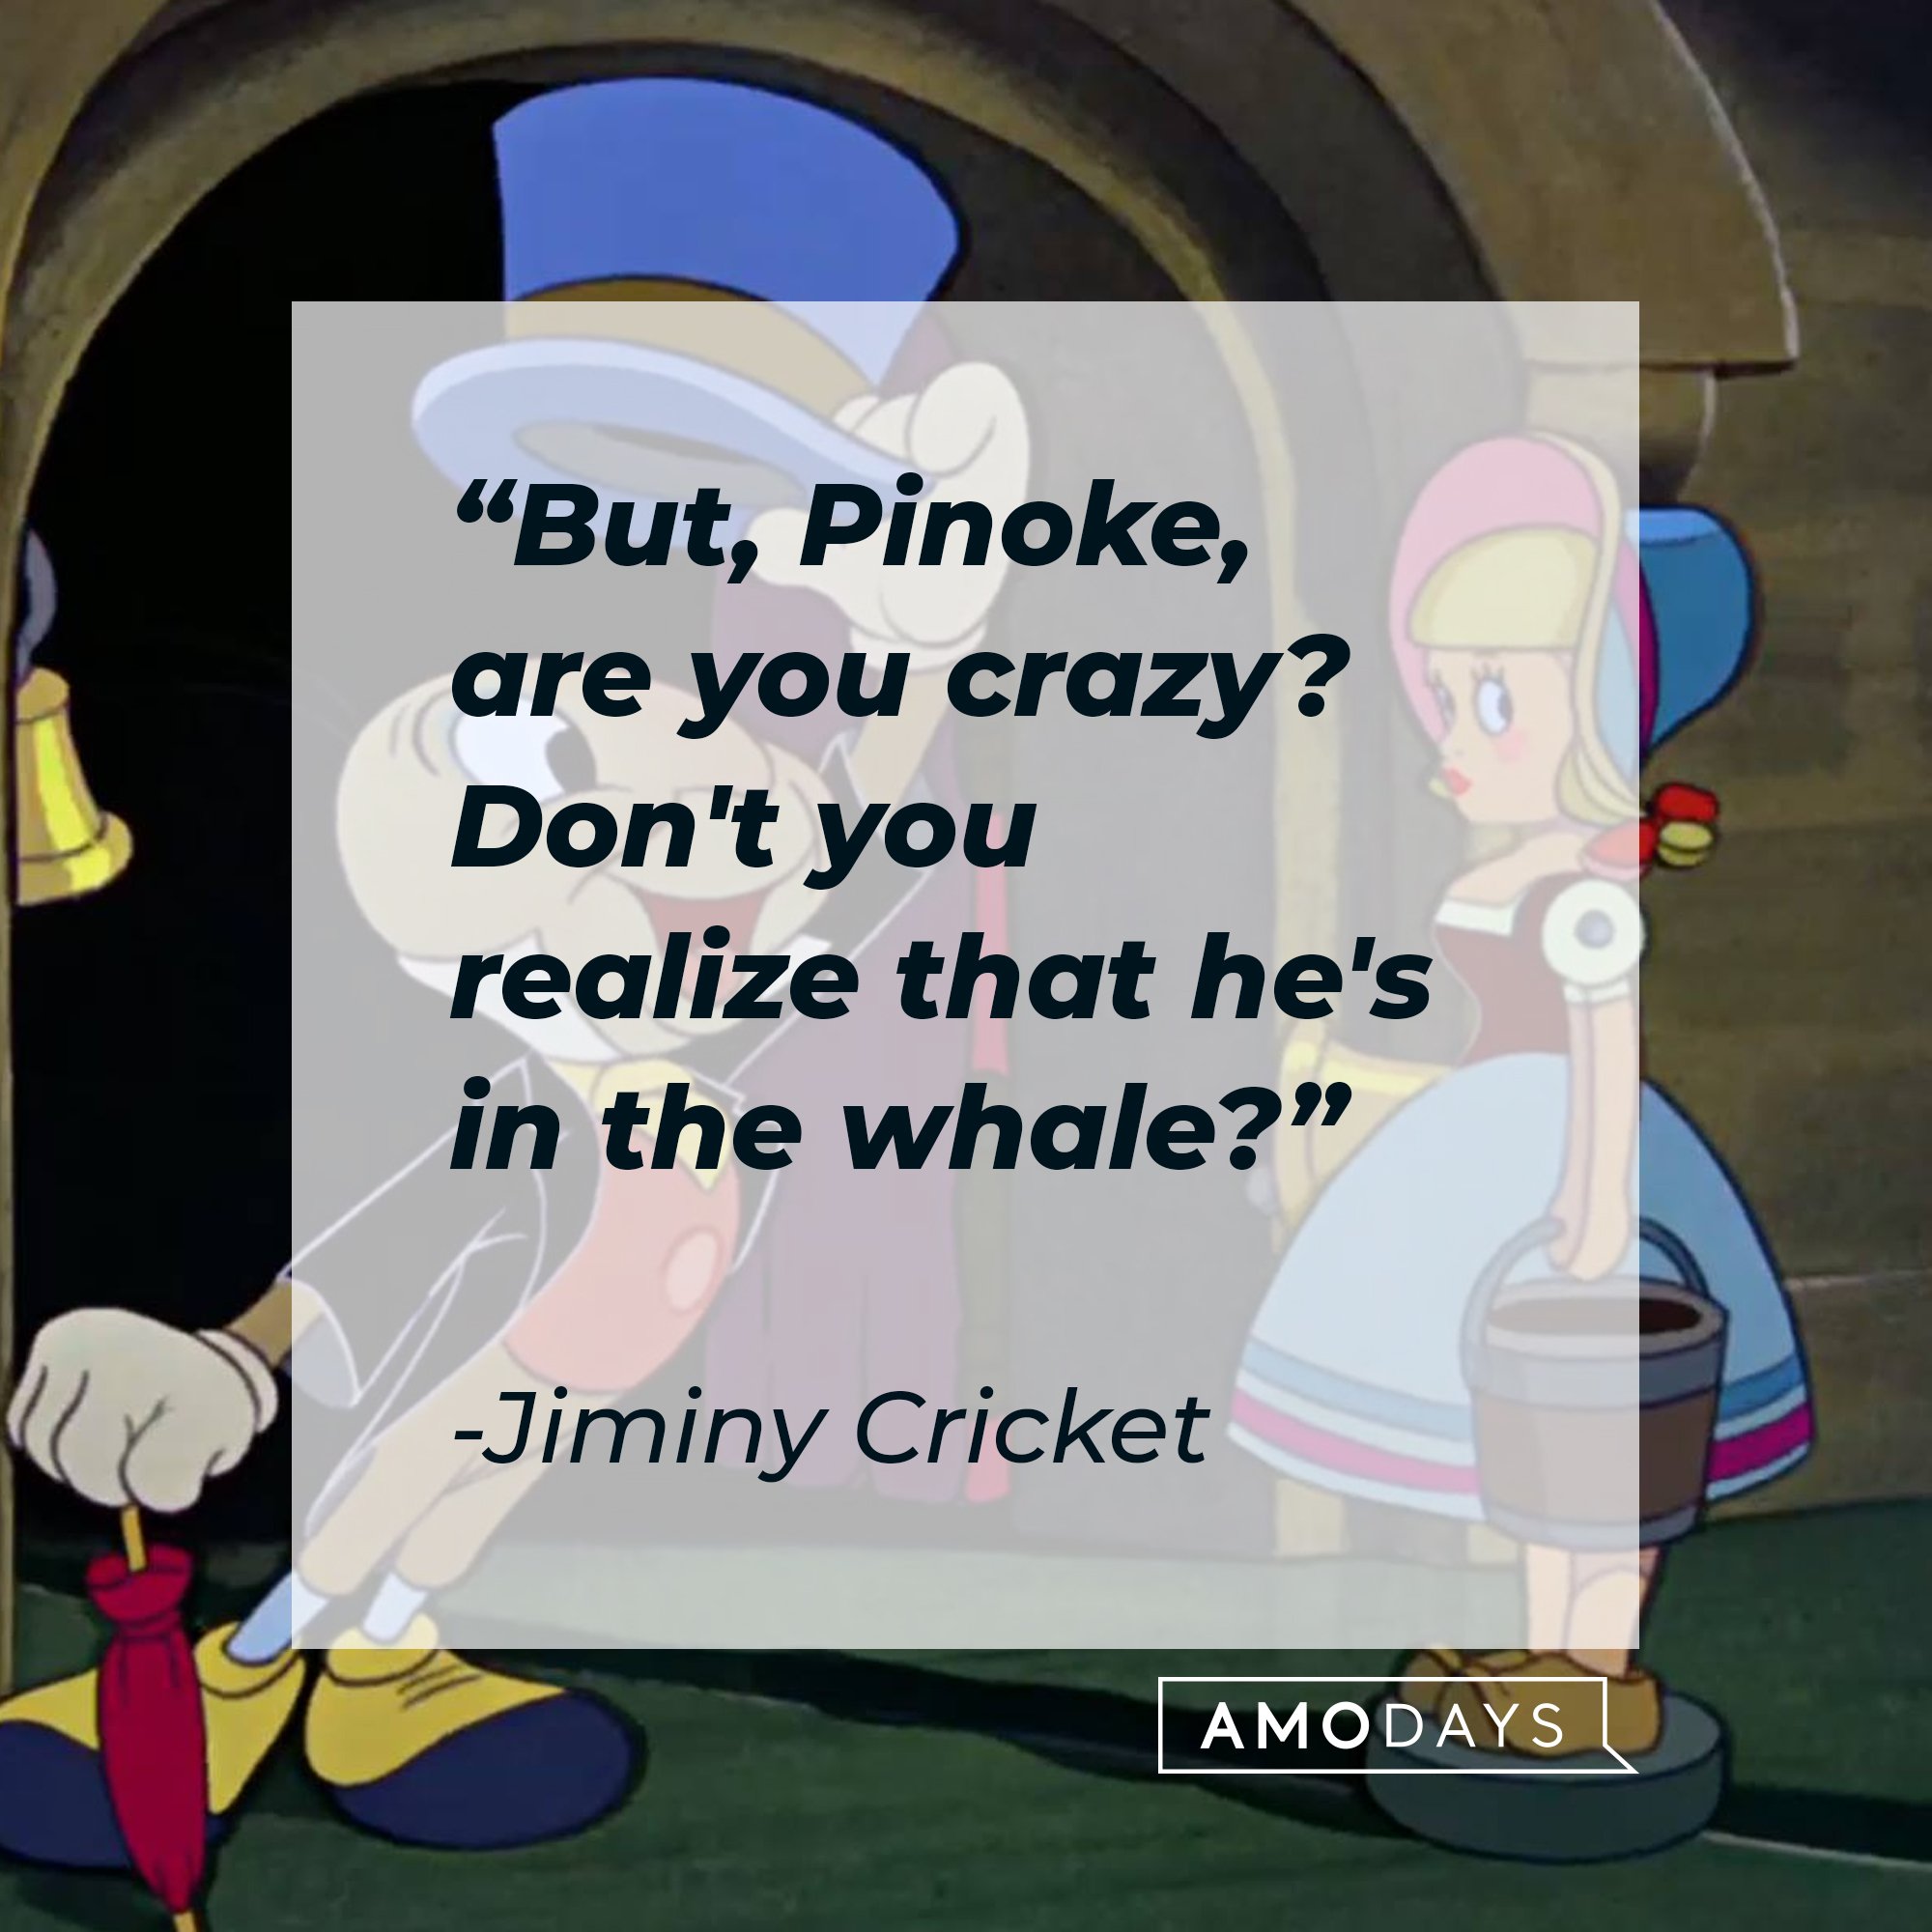  Jiminy Cricket's quote: "But, Pinoke, are you crazy? Don't you realize that he's in the whale?" | Image: AmoDays